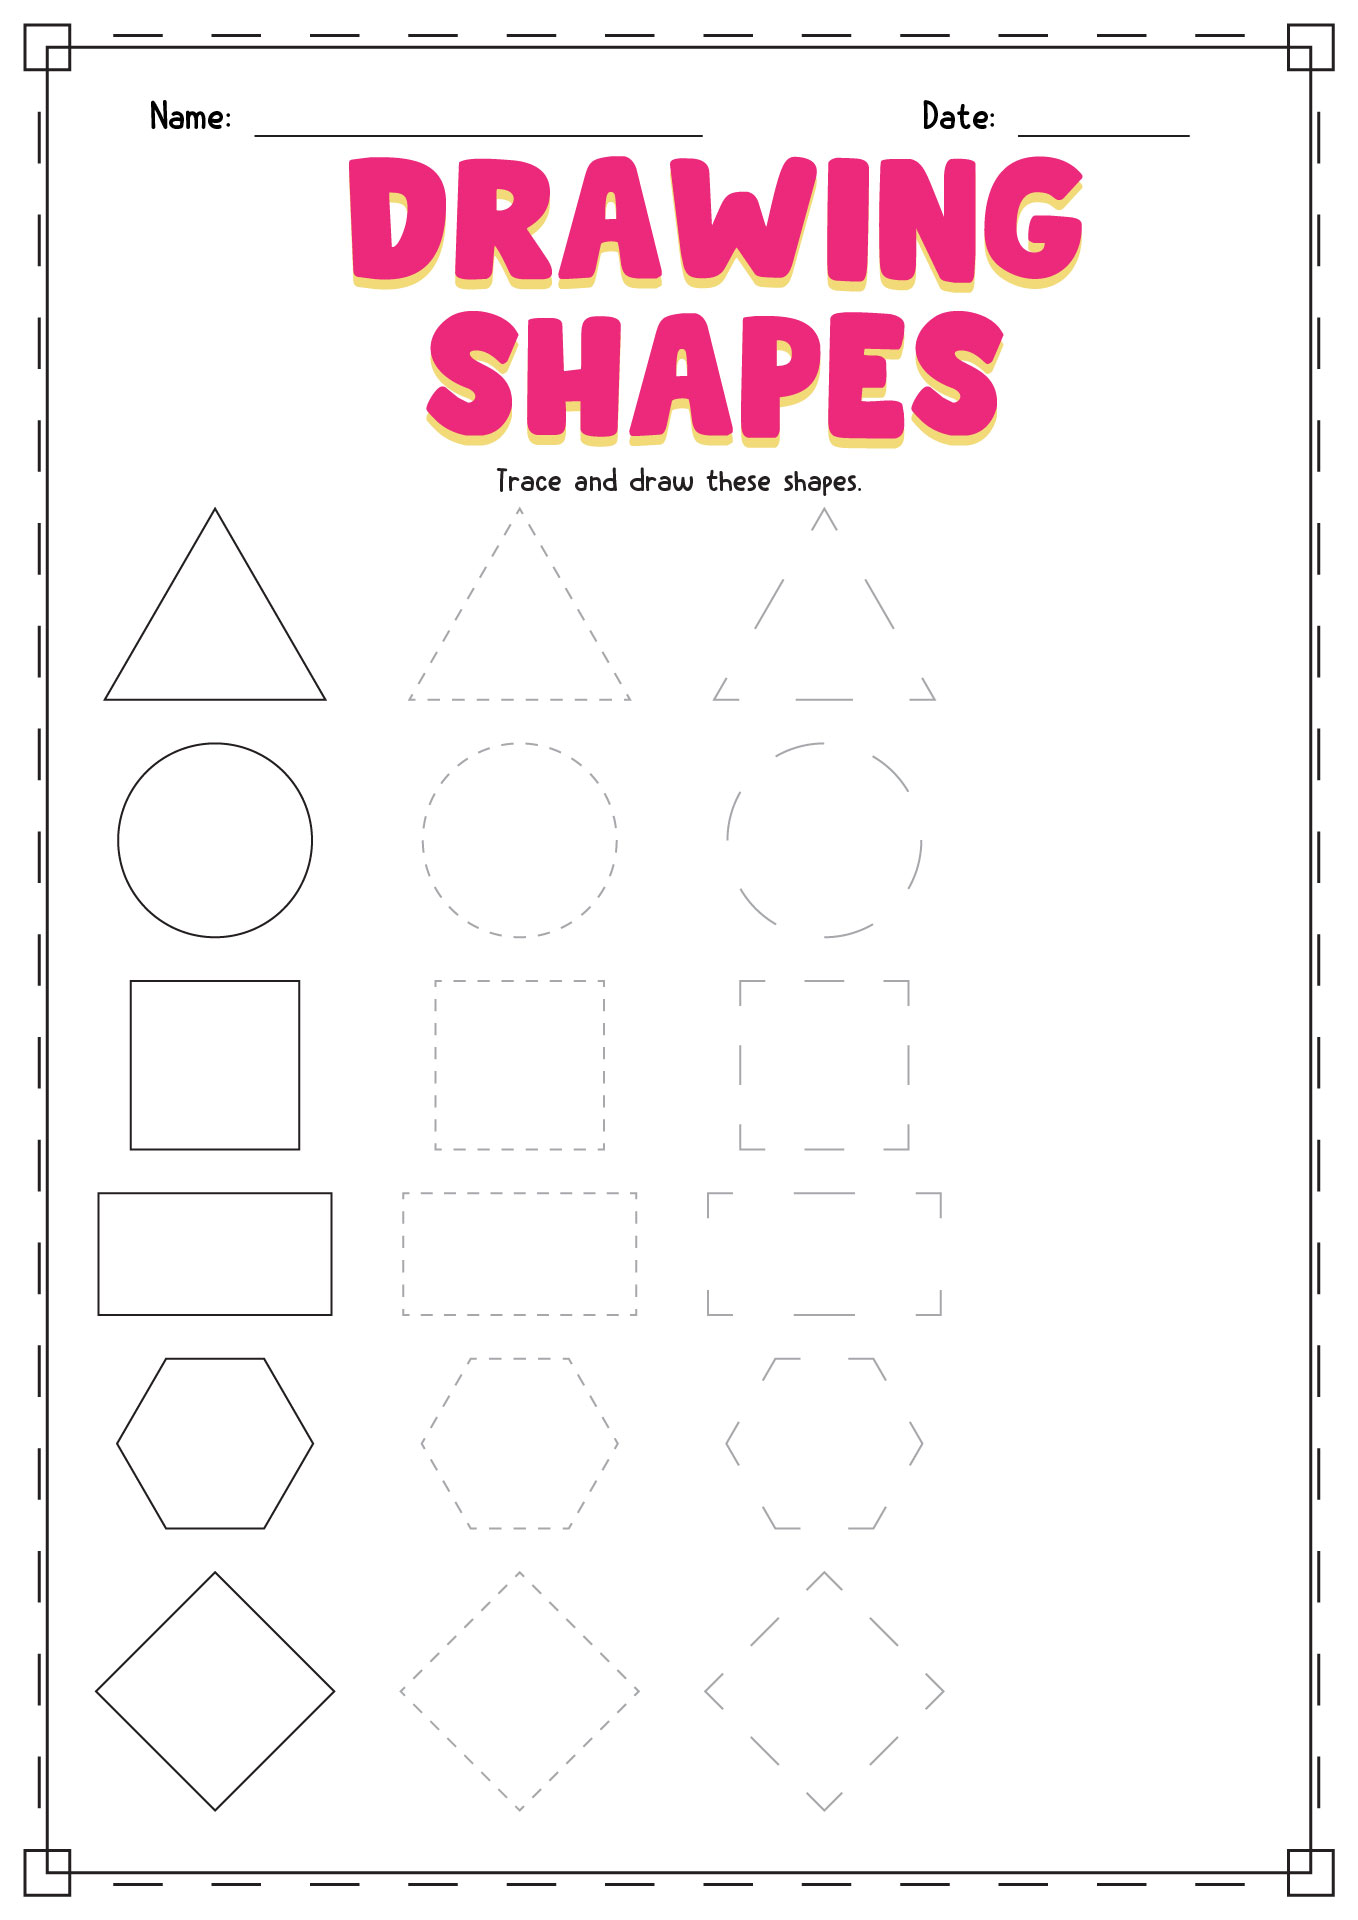 Practice Shapes Printables Image